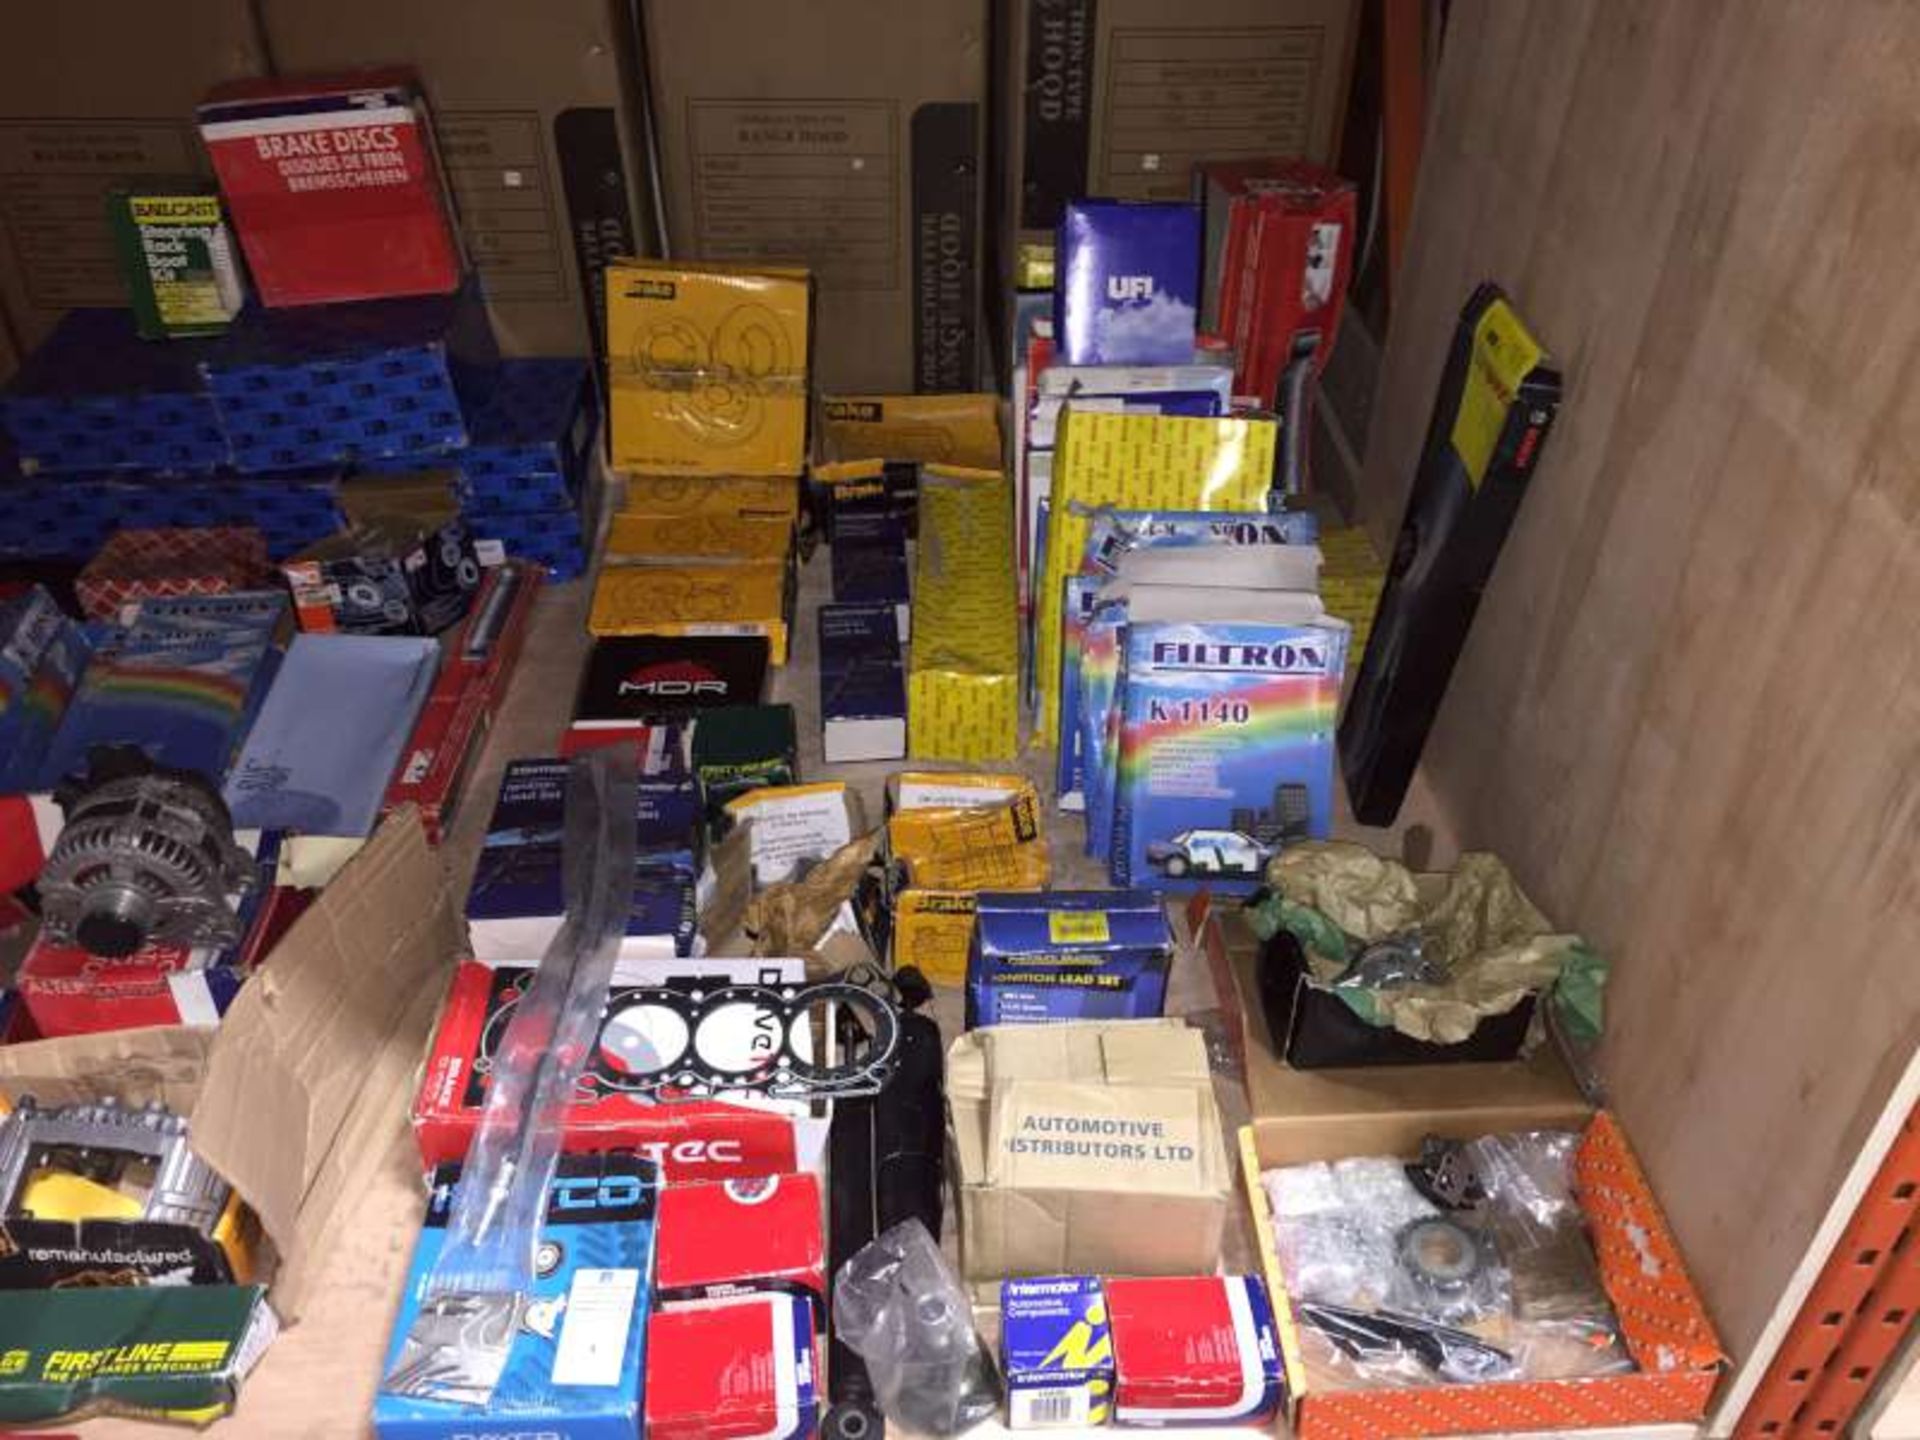 LOT CONTAINING A LARGE QTY OF VARIOUS CAR PARTS